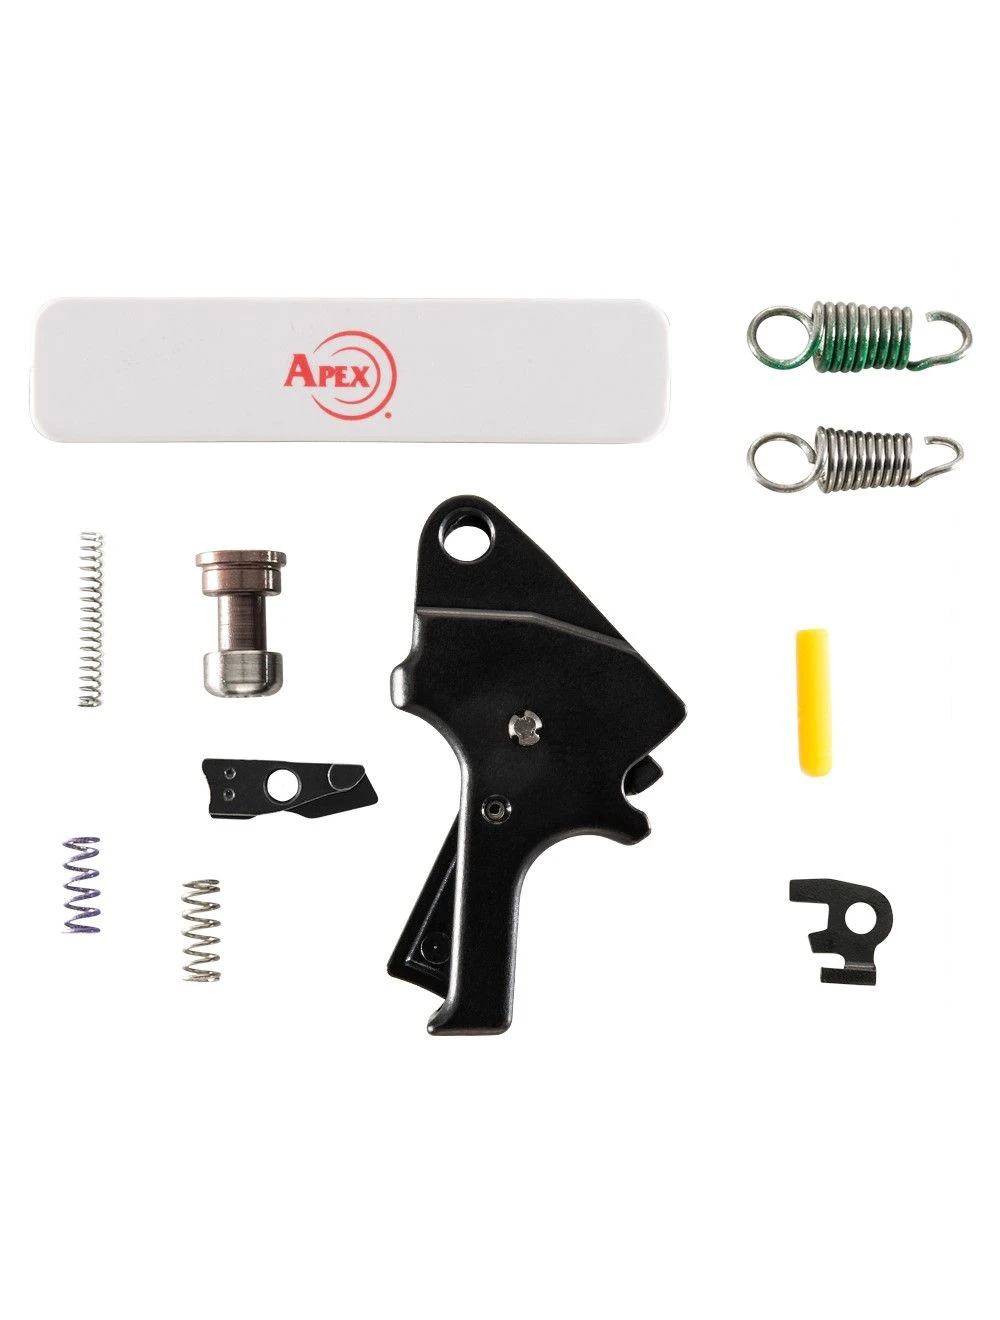 Flat-Faced Forward Set Trigger Kit for the M&P M2.0 - Paramount